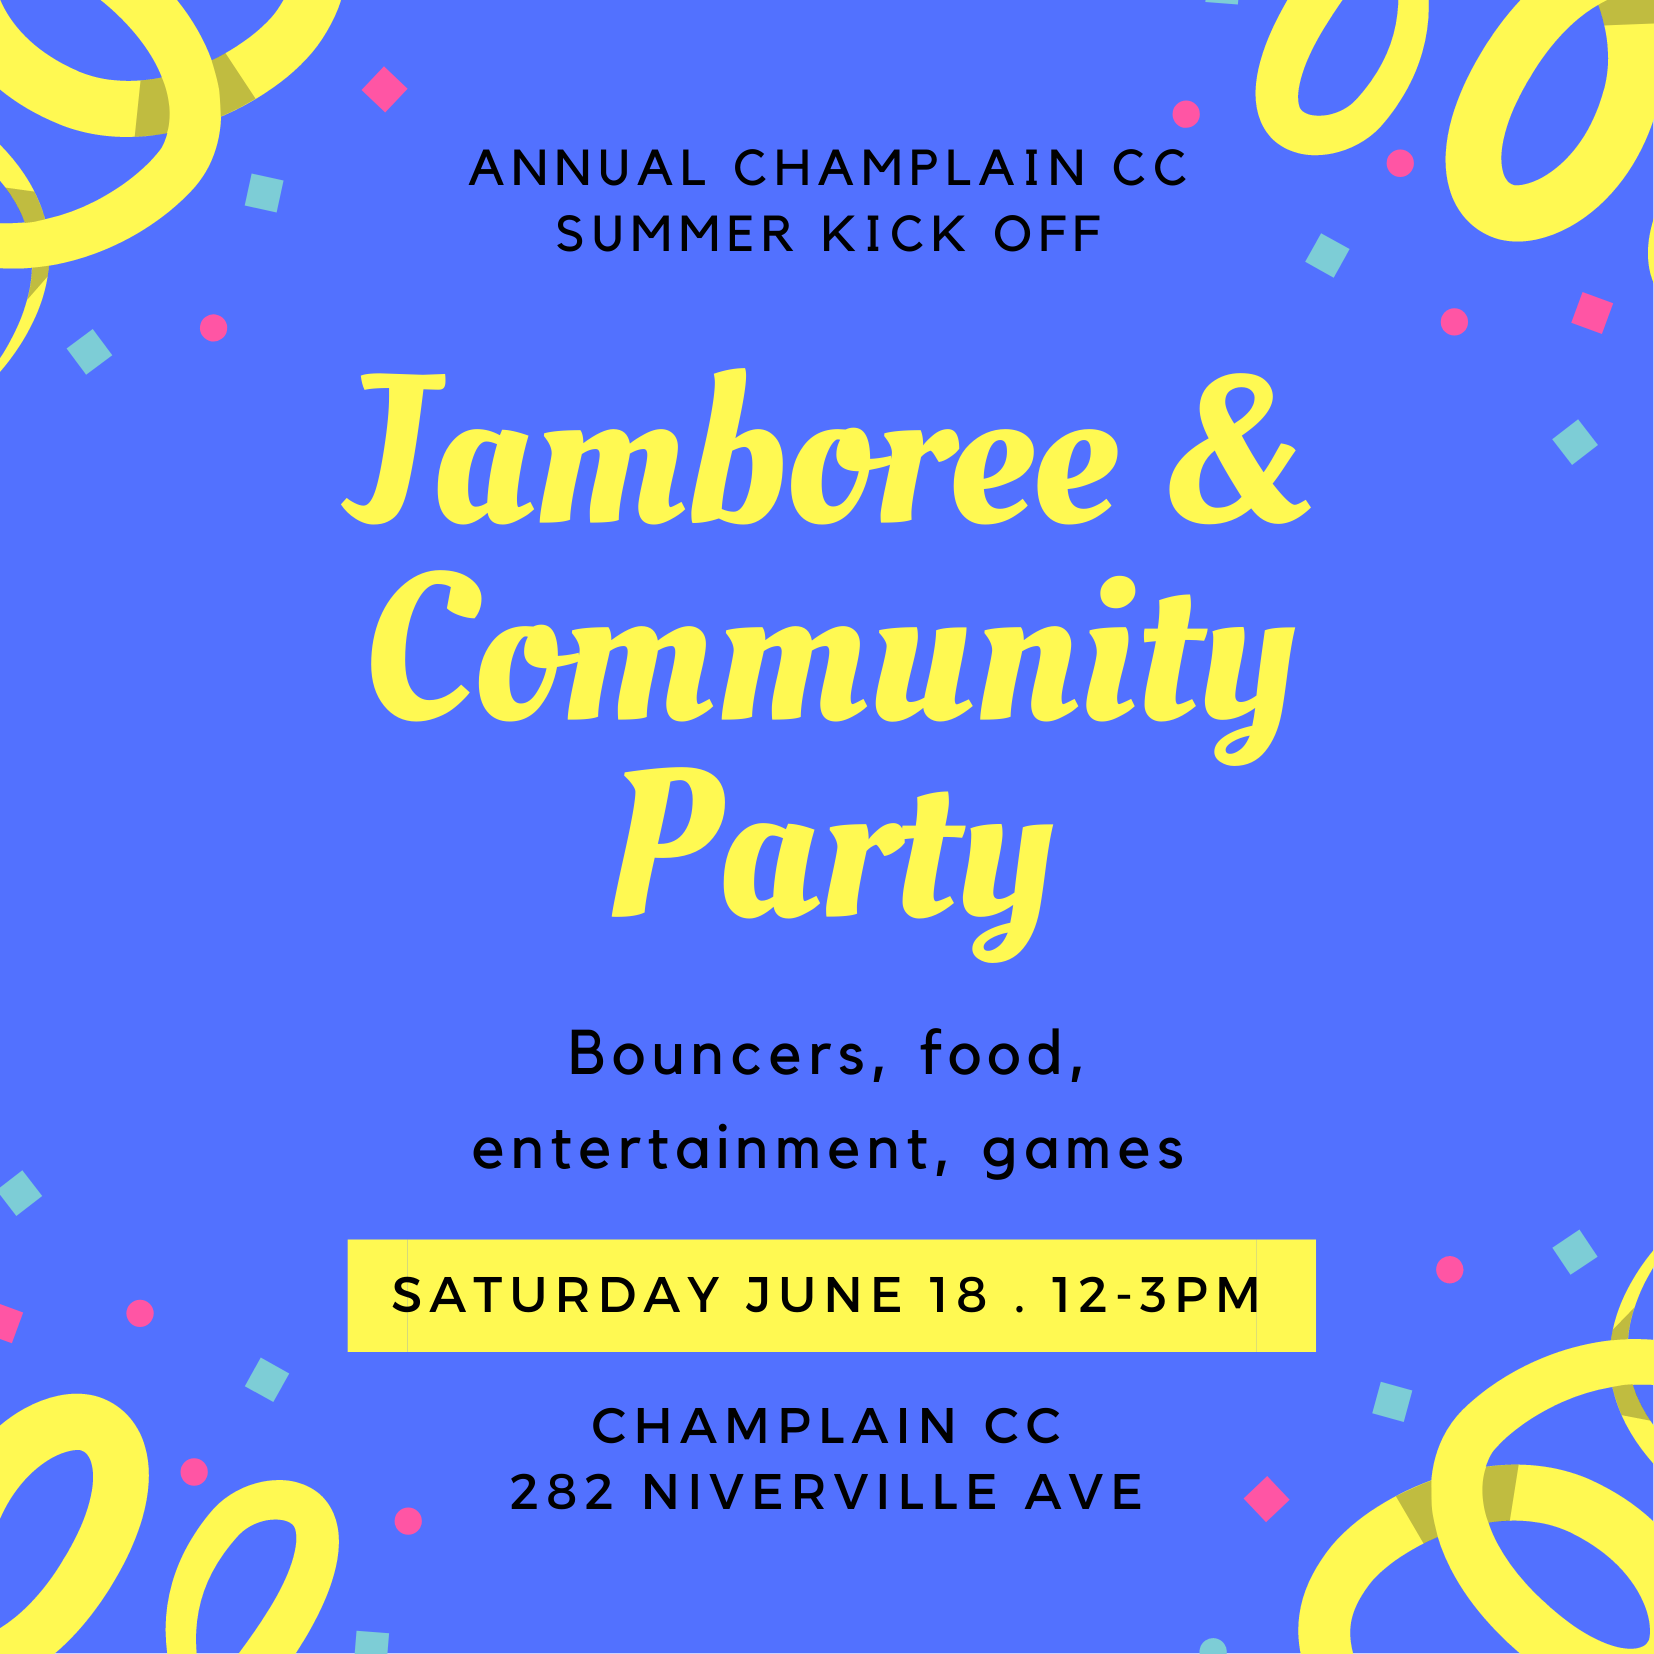 blue poster with yellow ribbon decorations. text" annual champlain cc summer kick off. Jamboree & Community Party. Bouncers, food, entertainment, games. Saturday June 18 12-3pm. Champlain CC, 282 Niverville Ave."